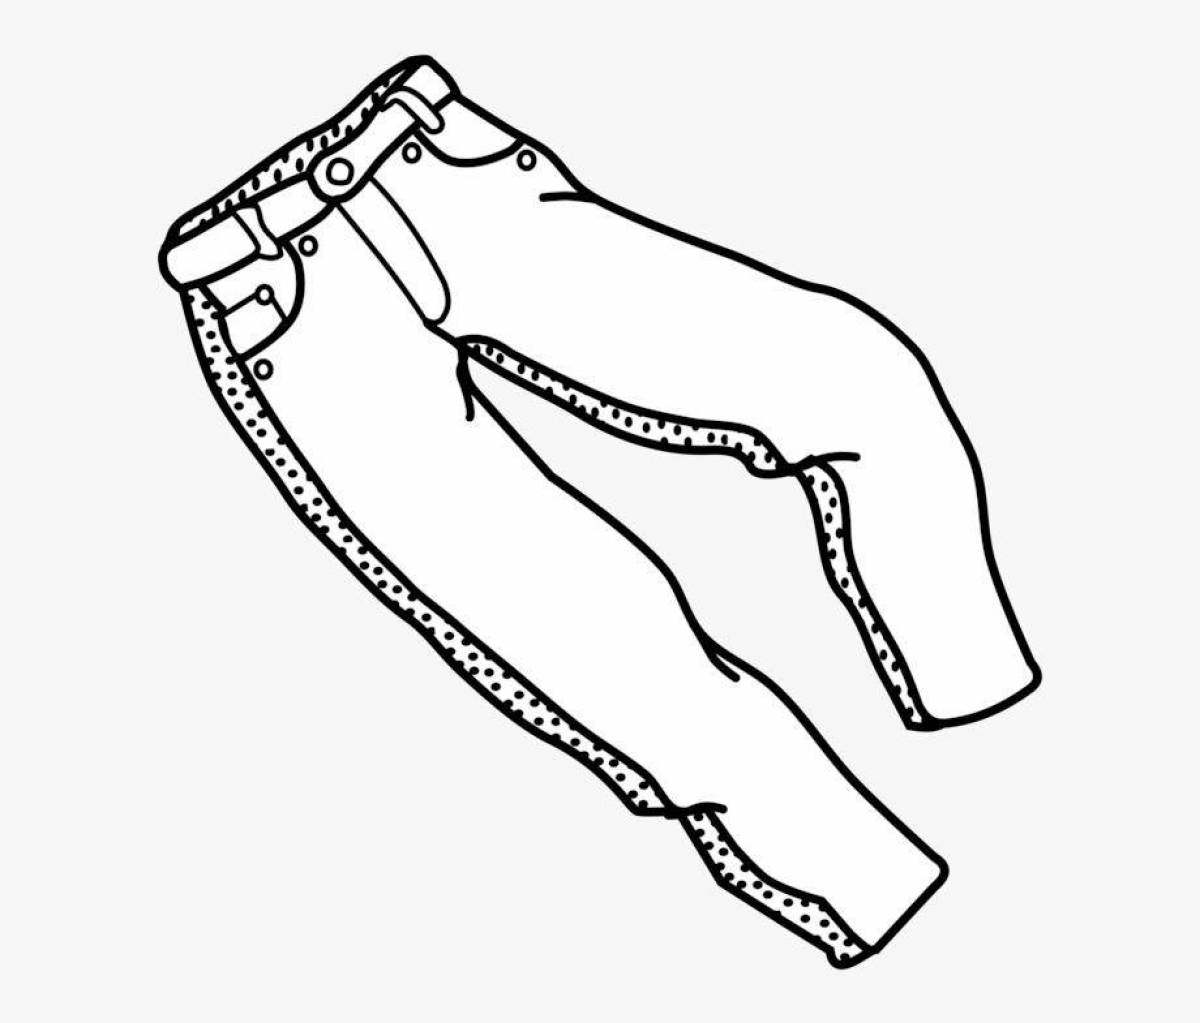 Adorable jeans coloring page